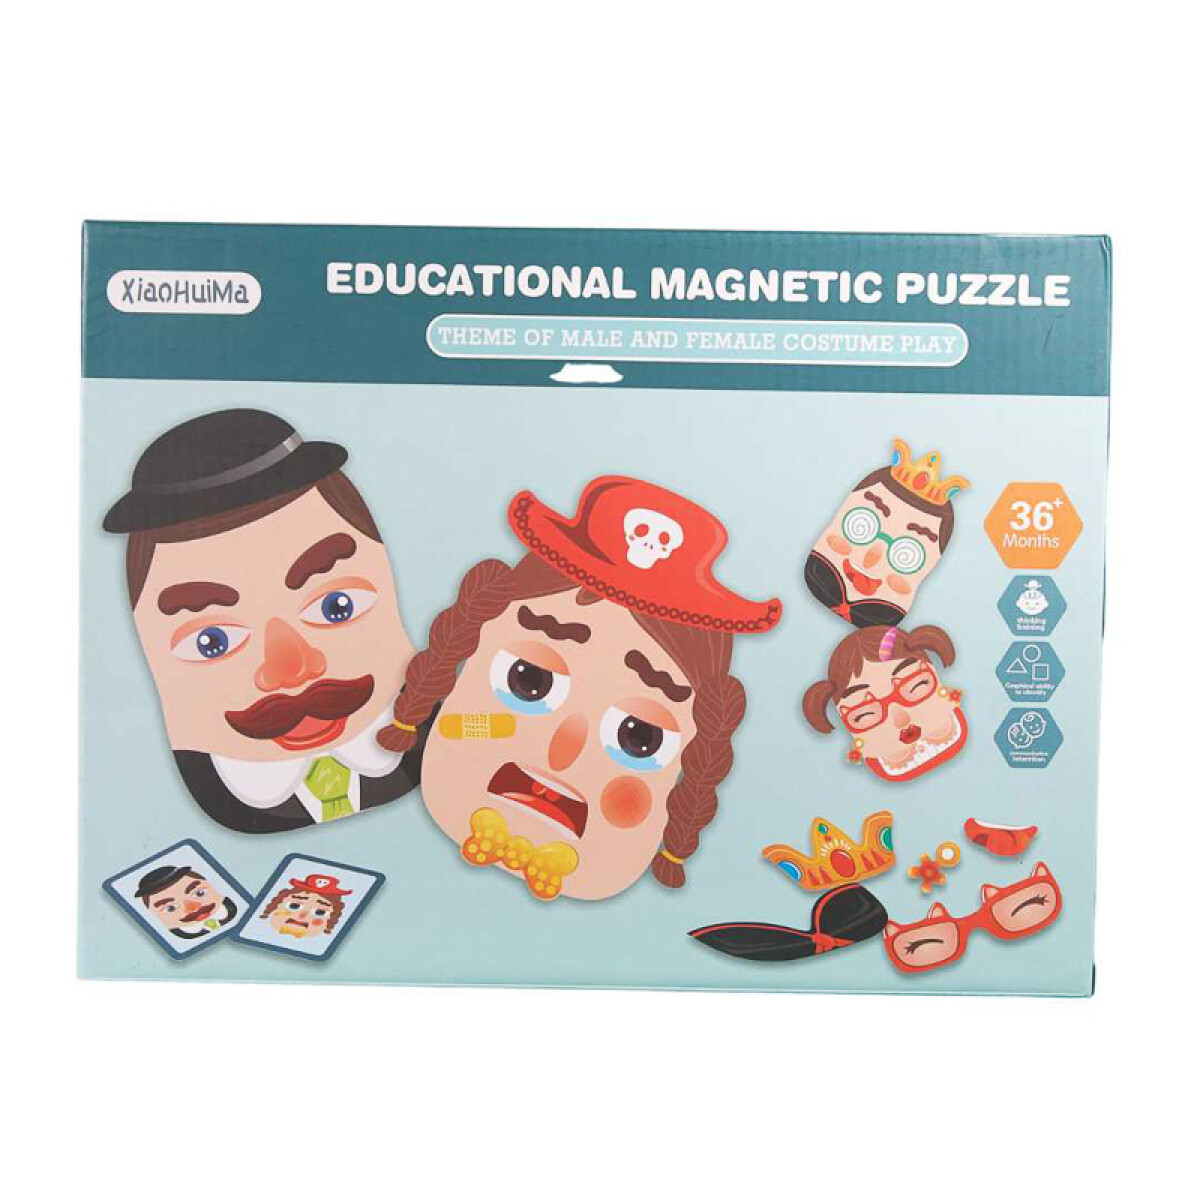 3x2 OUTLET Puzzle DYIMagnetico Didactico Educativo Caras 30* 